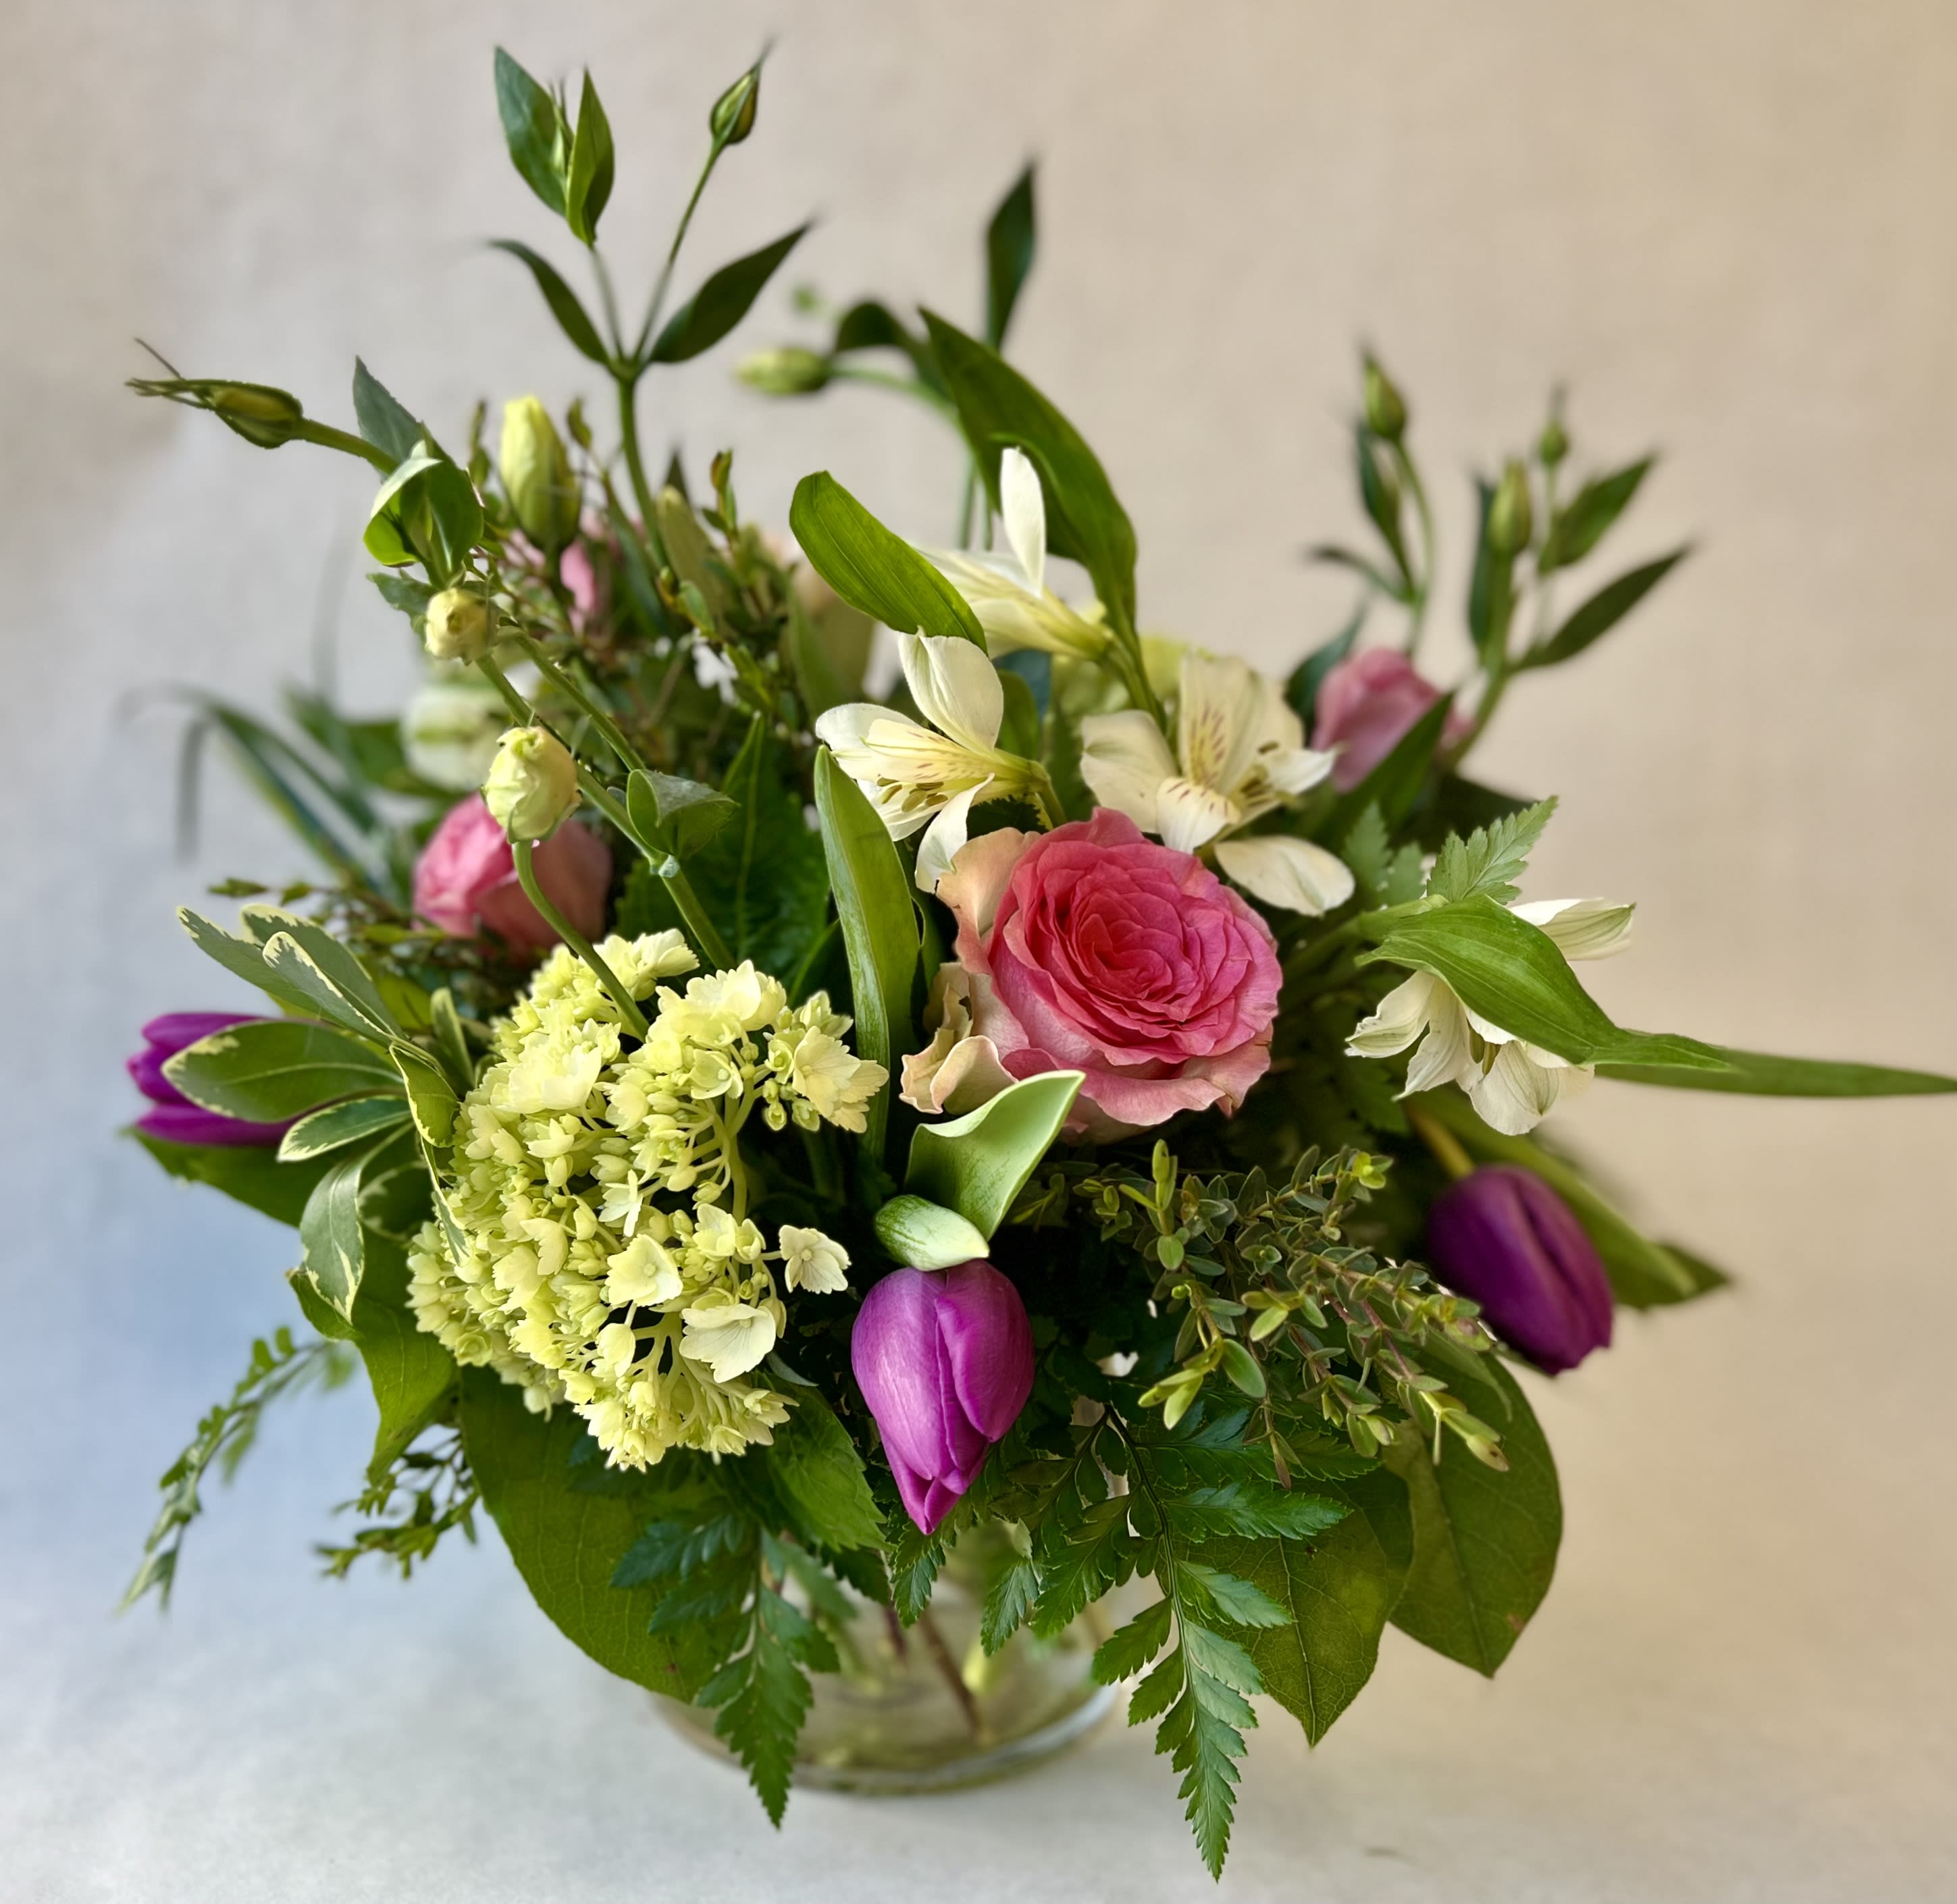 Butterfly Kisses - A lovely mixed bouquet featuring bright and cheery seasonal blooms arranged in a clear glass vase. 